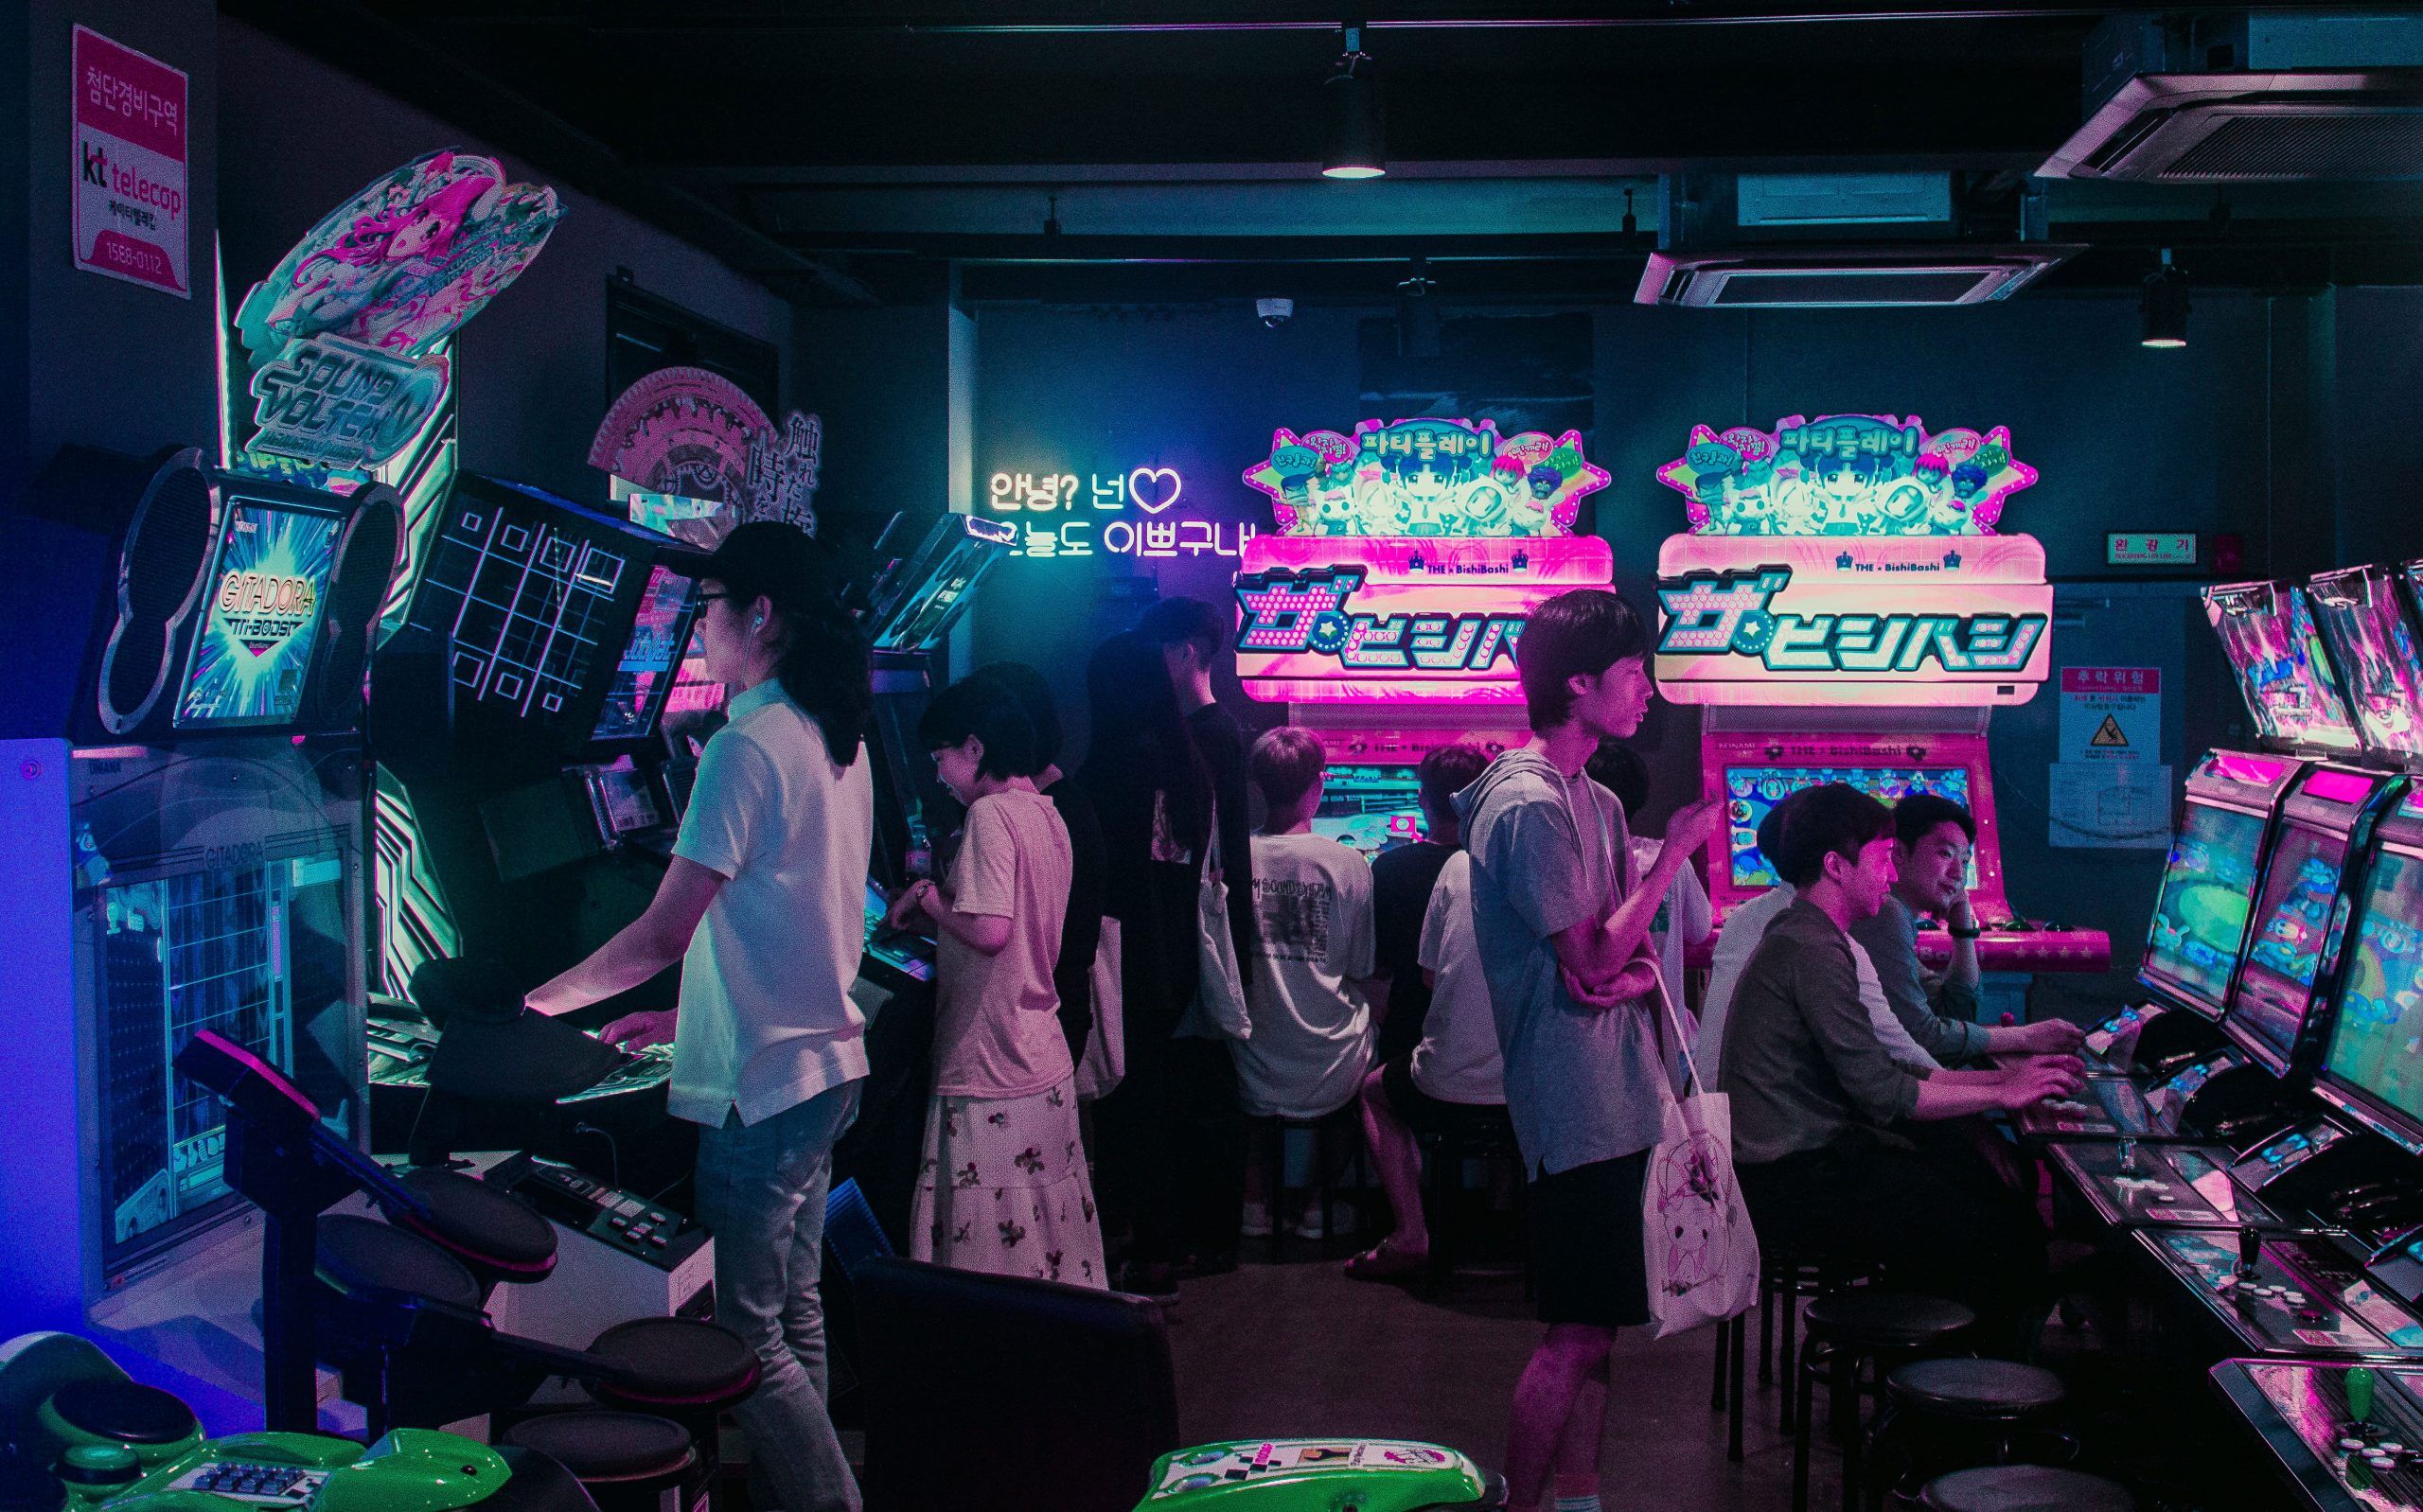 A group of people playing video games in a dark room with neon lights. - Arcade